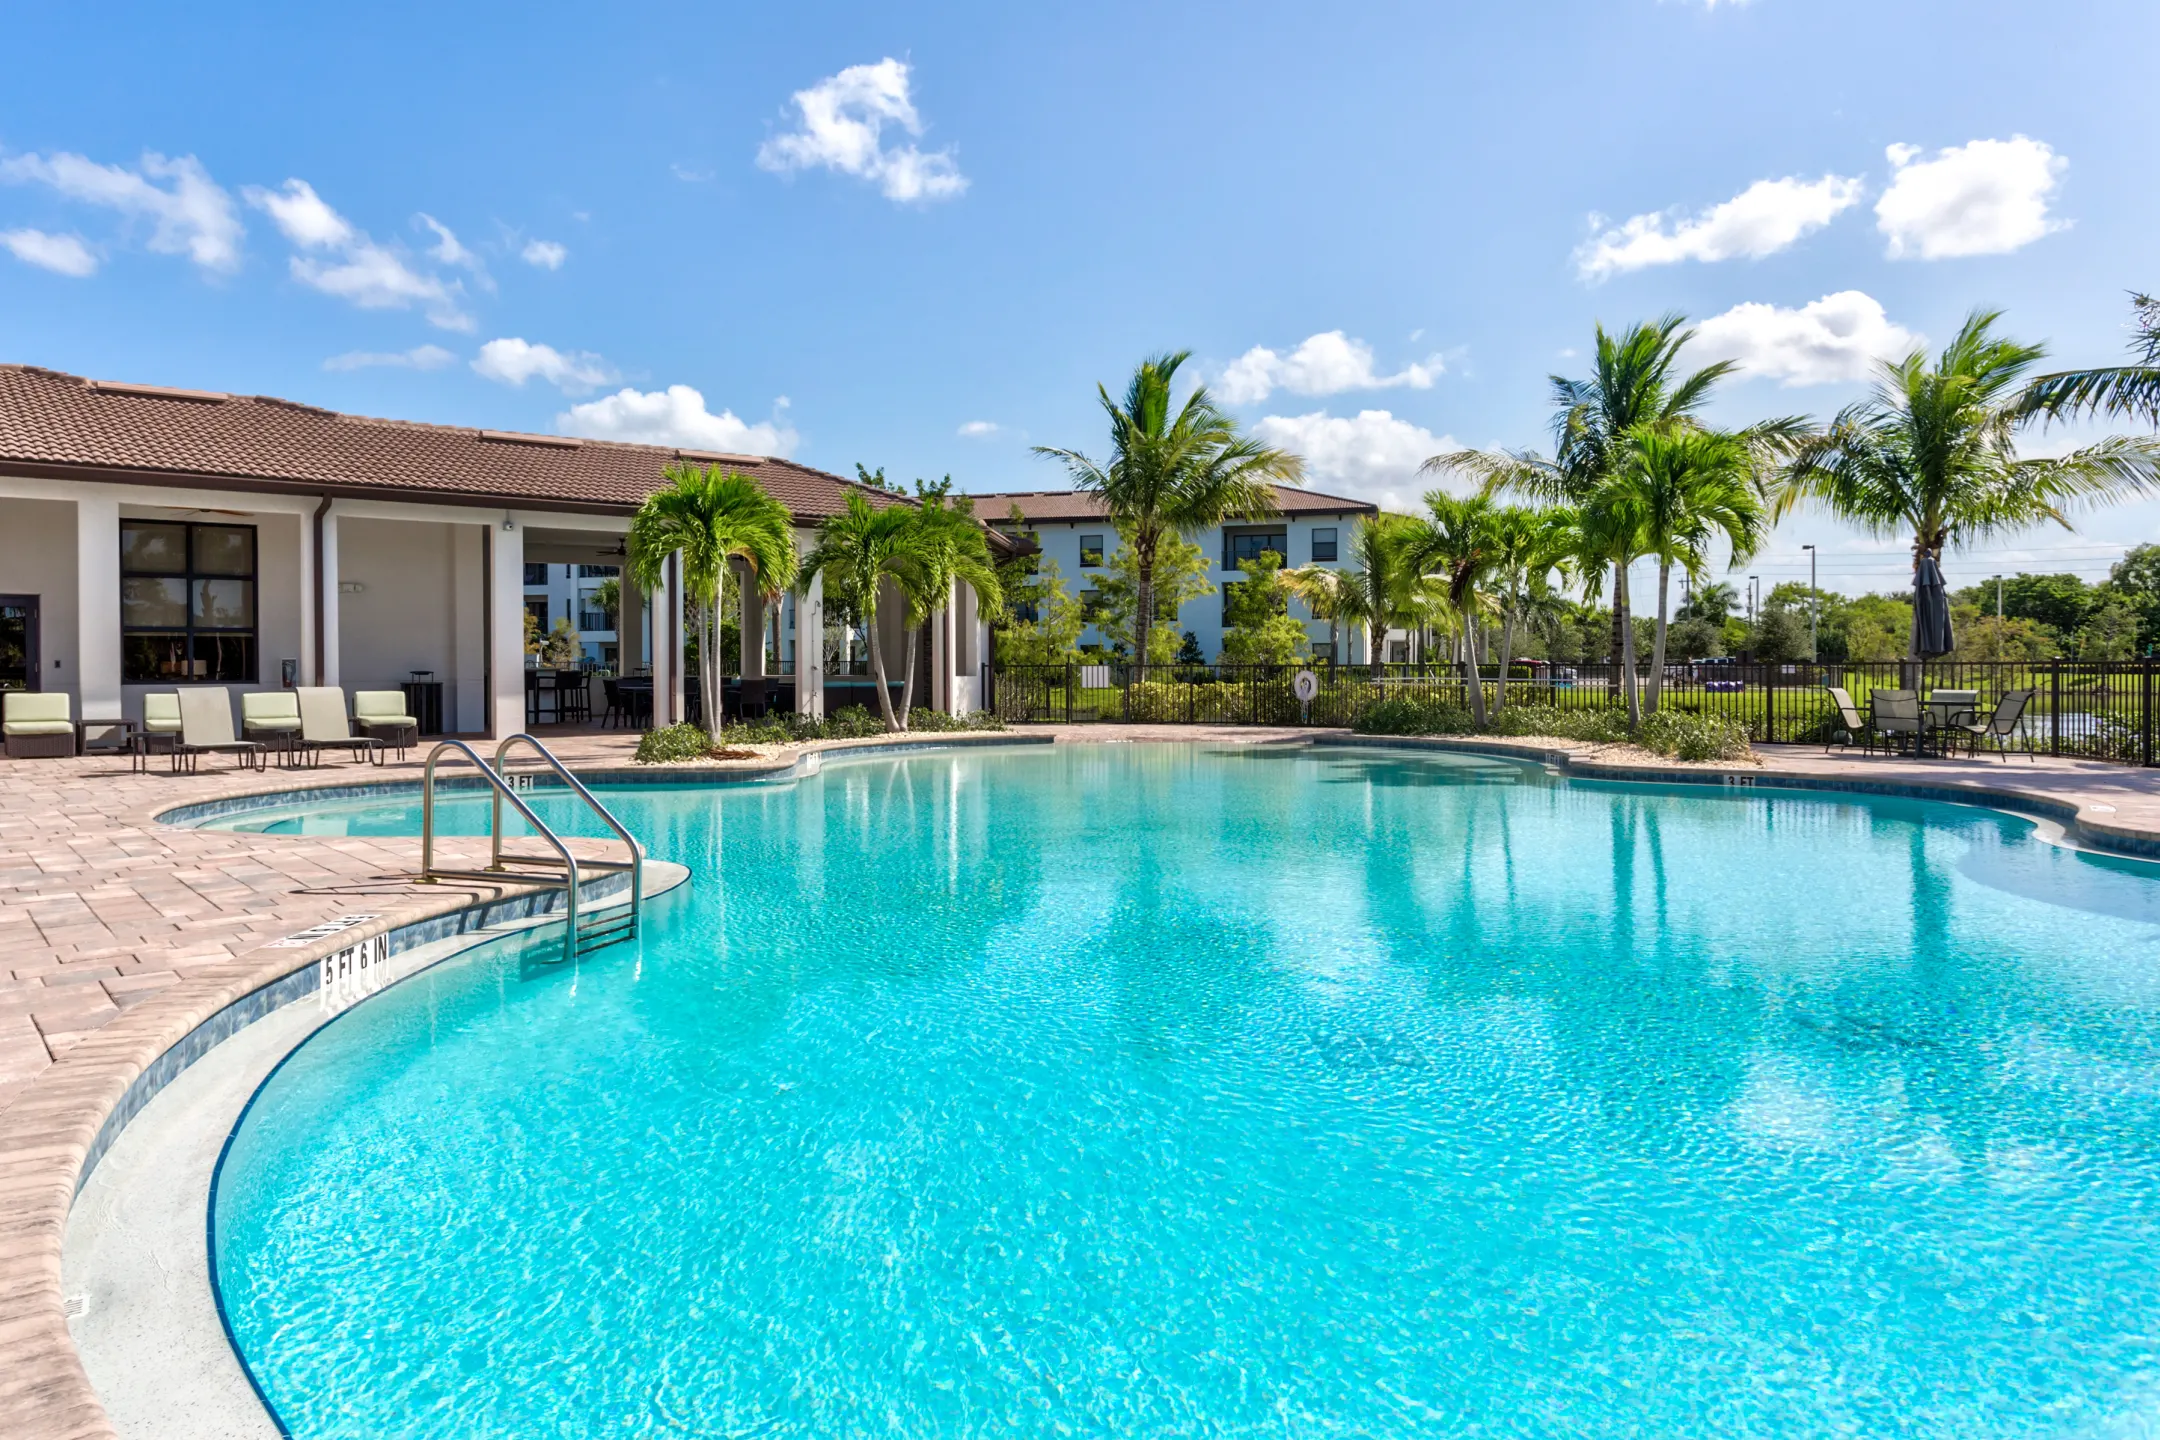 Pool - Channelside Contemporary Living Apartments - Fort Myers, FL